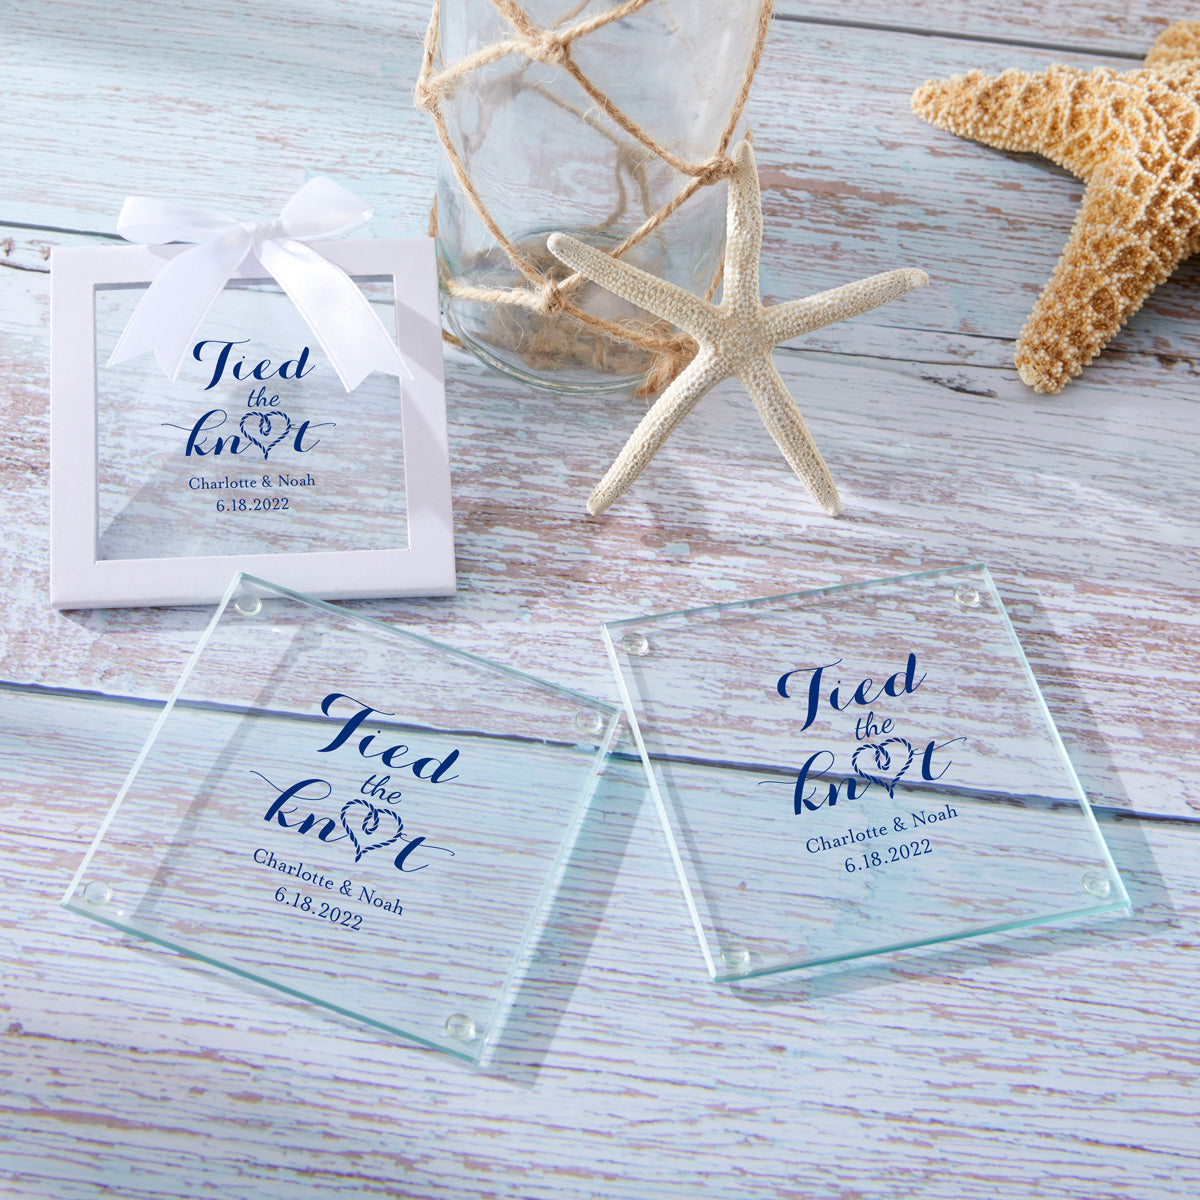 Personalized Glass Coaster (Set of 12) - Main Image5 | My Wedding Favors